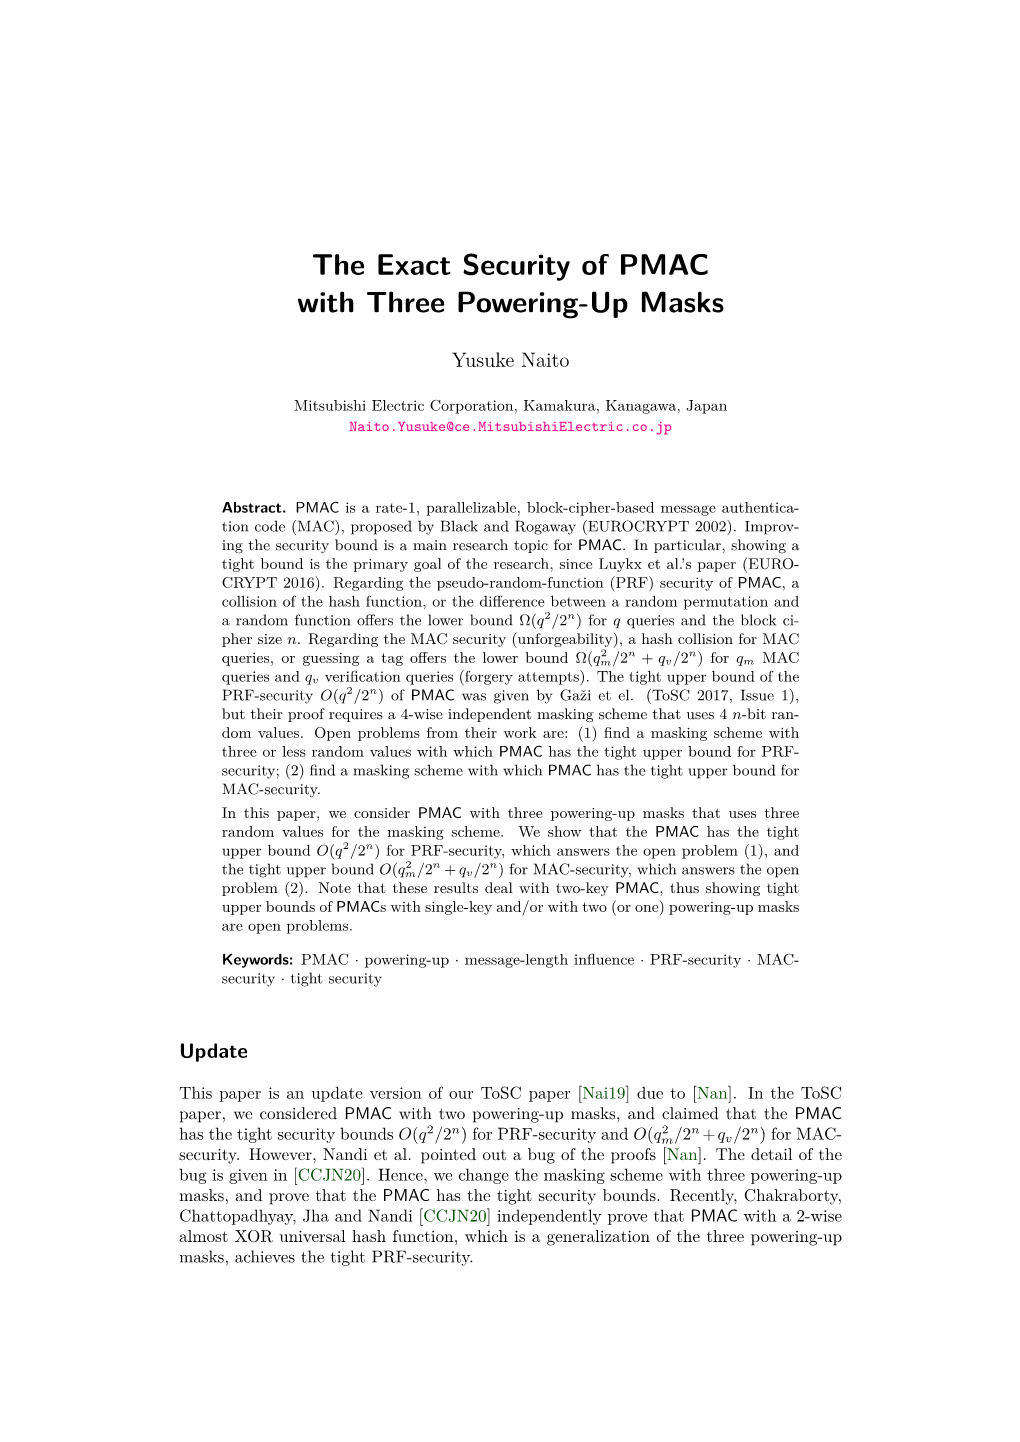 The Exact Security of PMAC with Three Powering-Up Masks